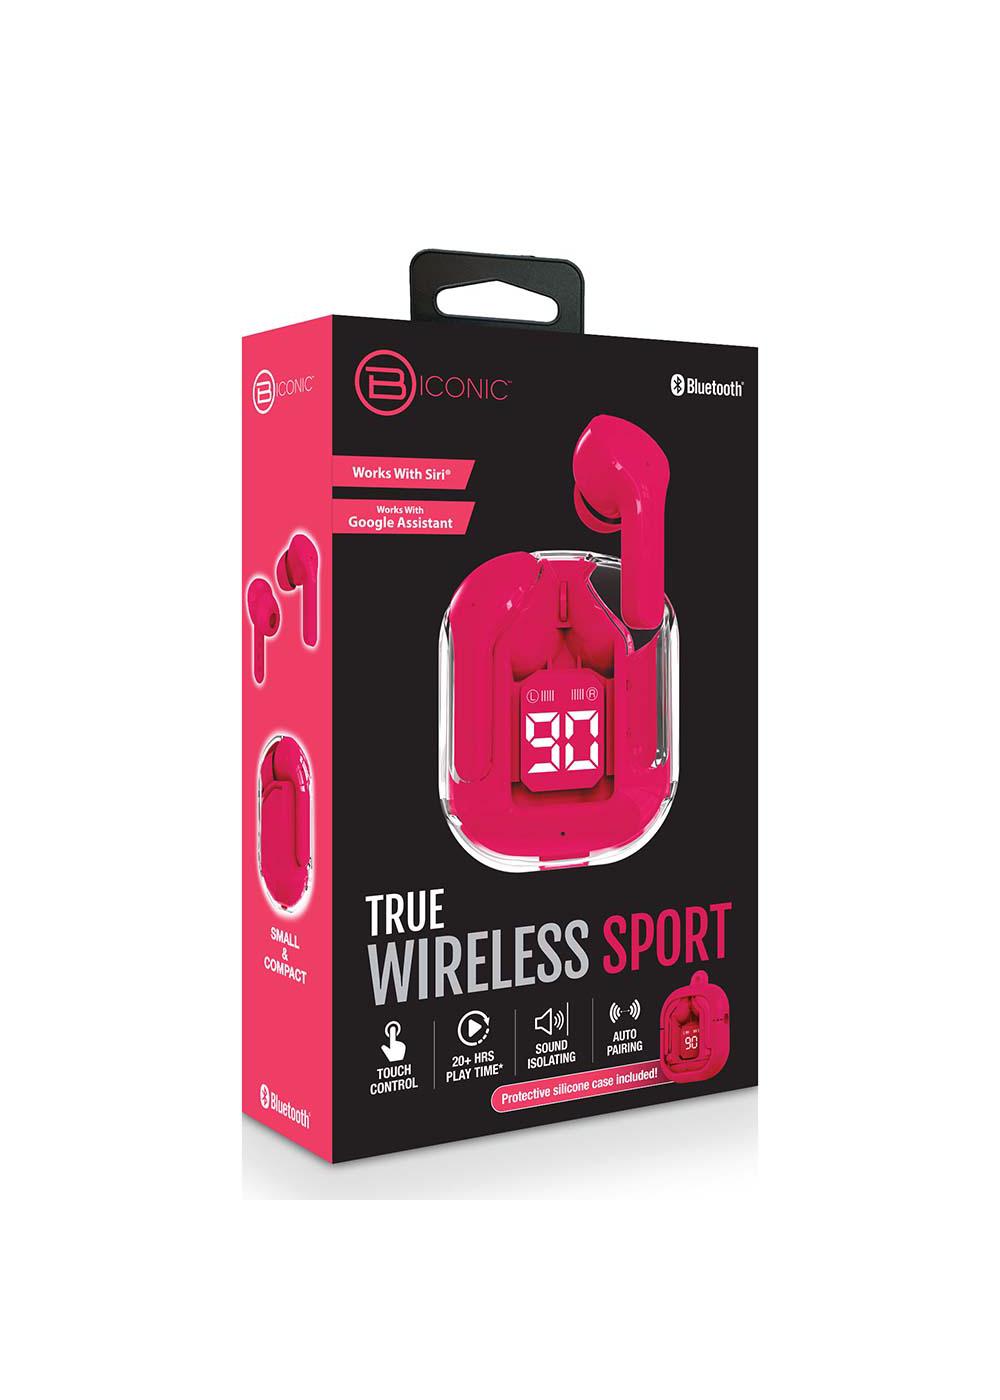 Biconic True Wireless Sport Earbuds Clear Red Shop Headphones At H E B 7994